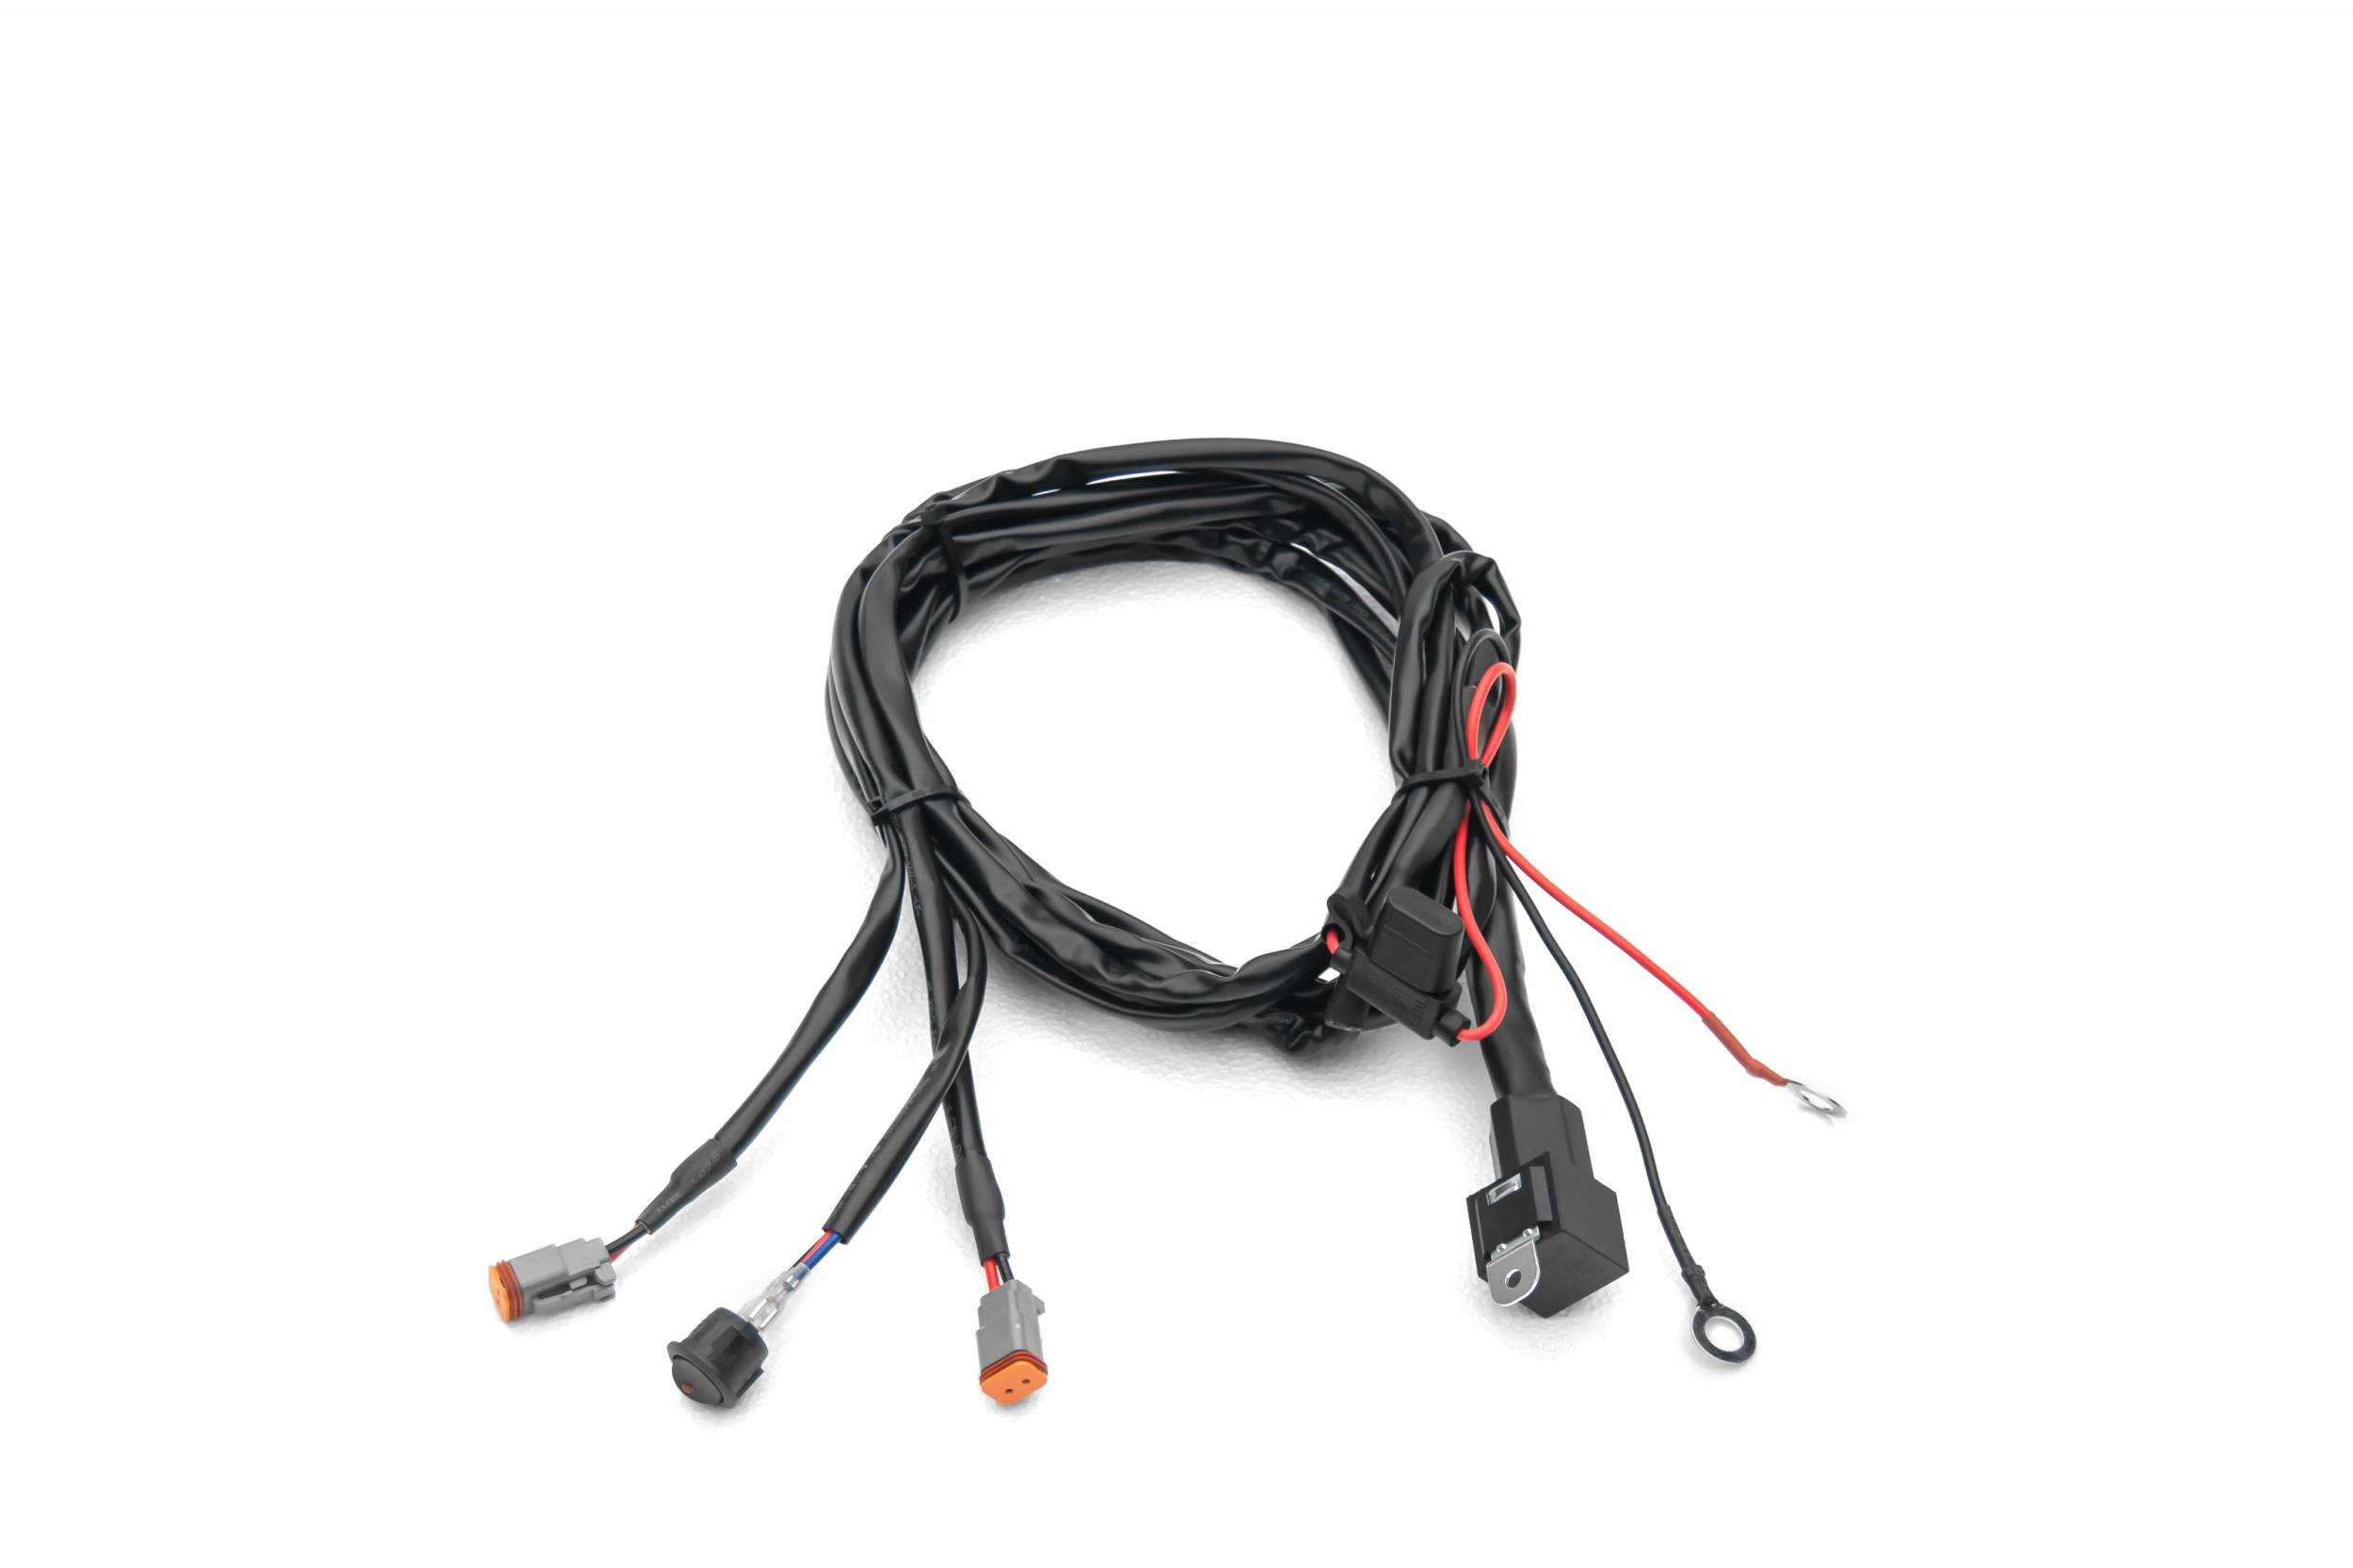 ZROADZ OFF ROAD PRODUCTS - Universal 25 FT DT Wiring Harness to connect 2 LED Light Bars, 200 Watt or below- Part # Z390020D-25A